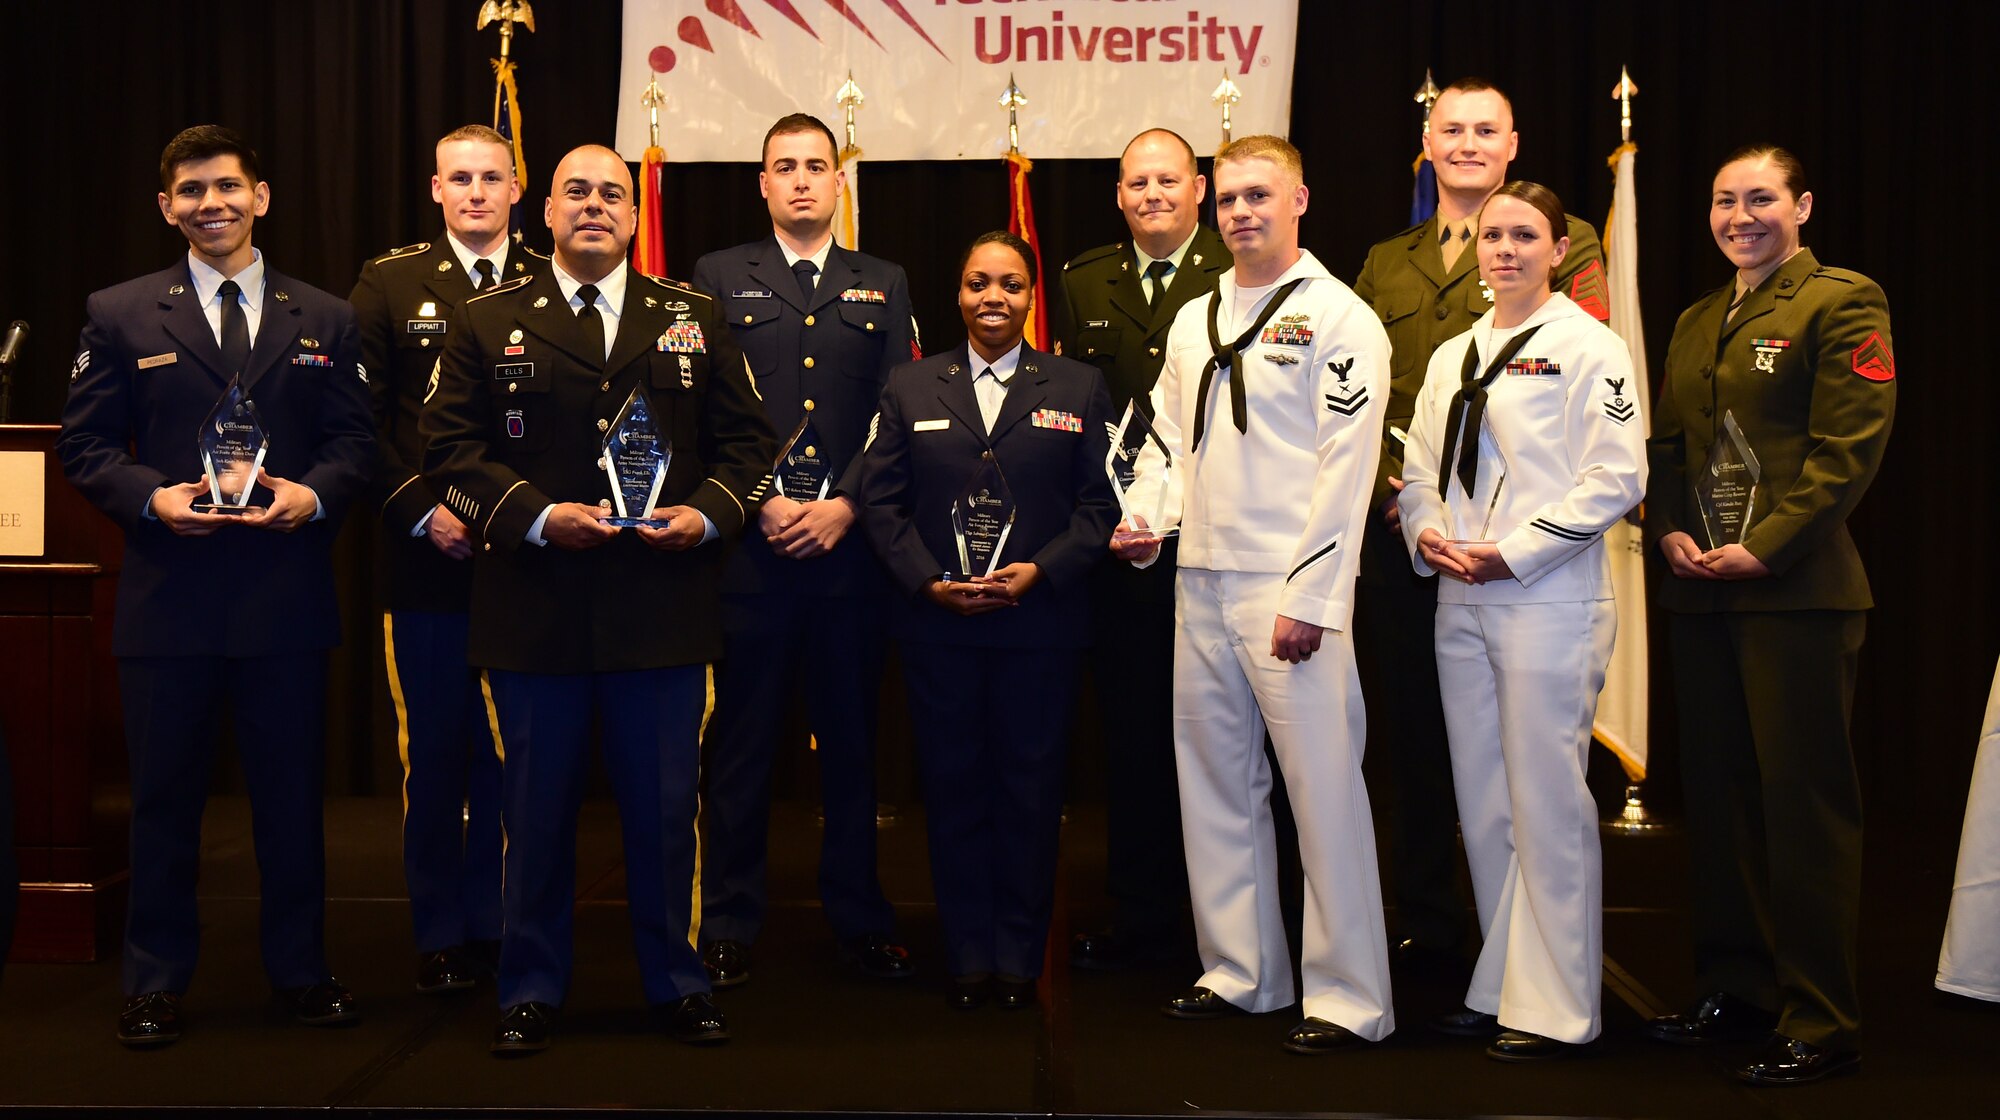 Award winners stand together May 13, 2016, after the Armed Forces Recognition Luncheon at the Doubletree Stapleton Hotel in Denver. The Aurora Chamber of Commerce along with local businesses hosts the annual lunch to recognize and honor the growing number of active duty, guard and reserve Service members throughout the area. (U.S. Air Force photo by Airman 1st Class Gabrielle Spradling/Released)